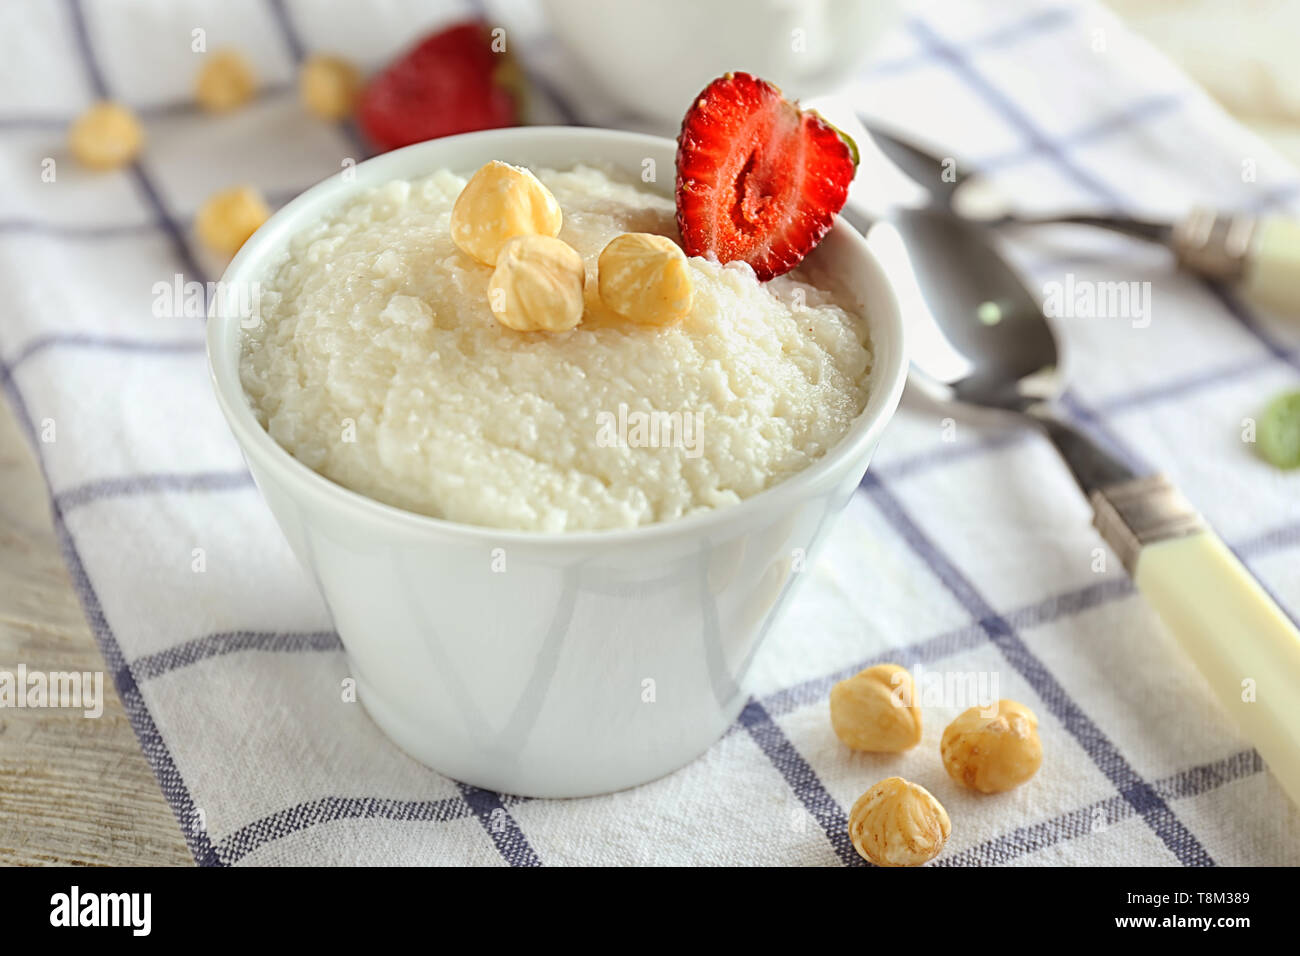 Delicious rice pudding with strawberry and hazelnuts in bowl on table Stock Photo